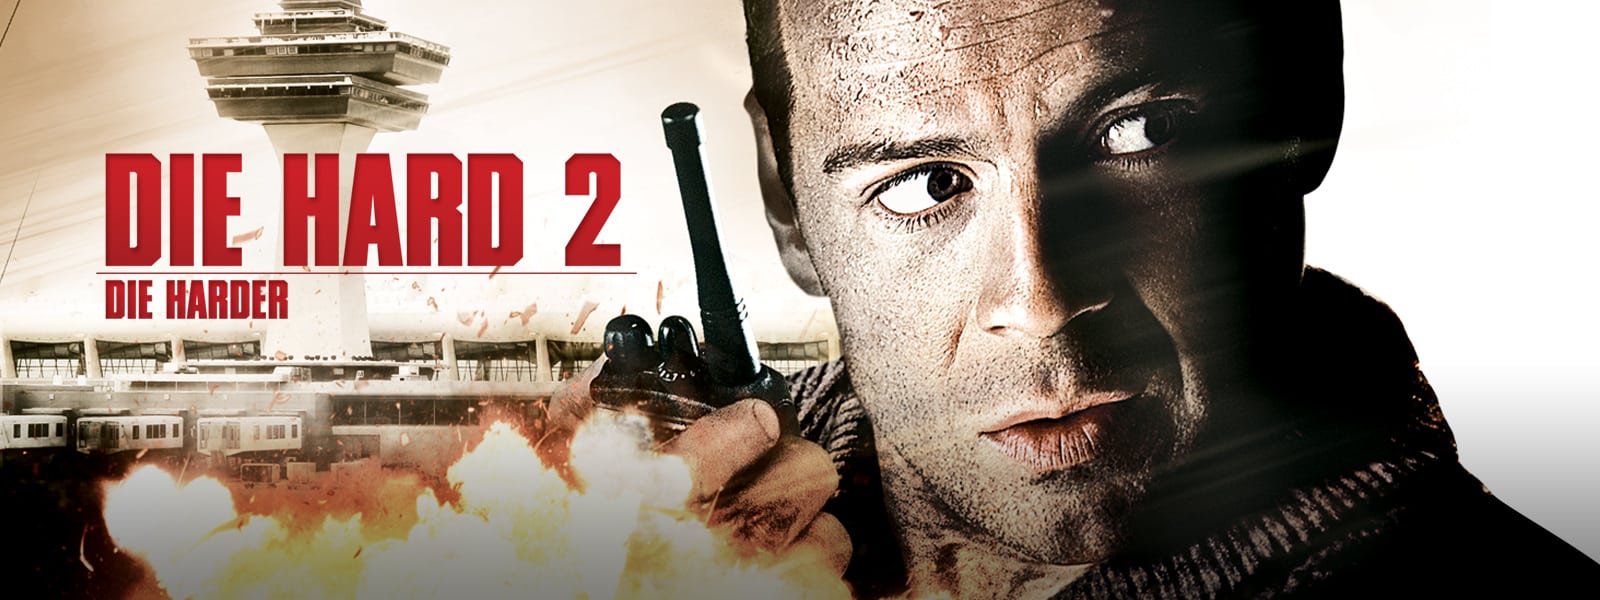 Top 20 Action Movies of the 1990s - Miguel Edition - Die Hard - The Guy Blog